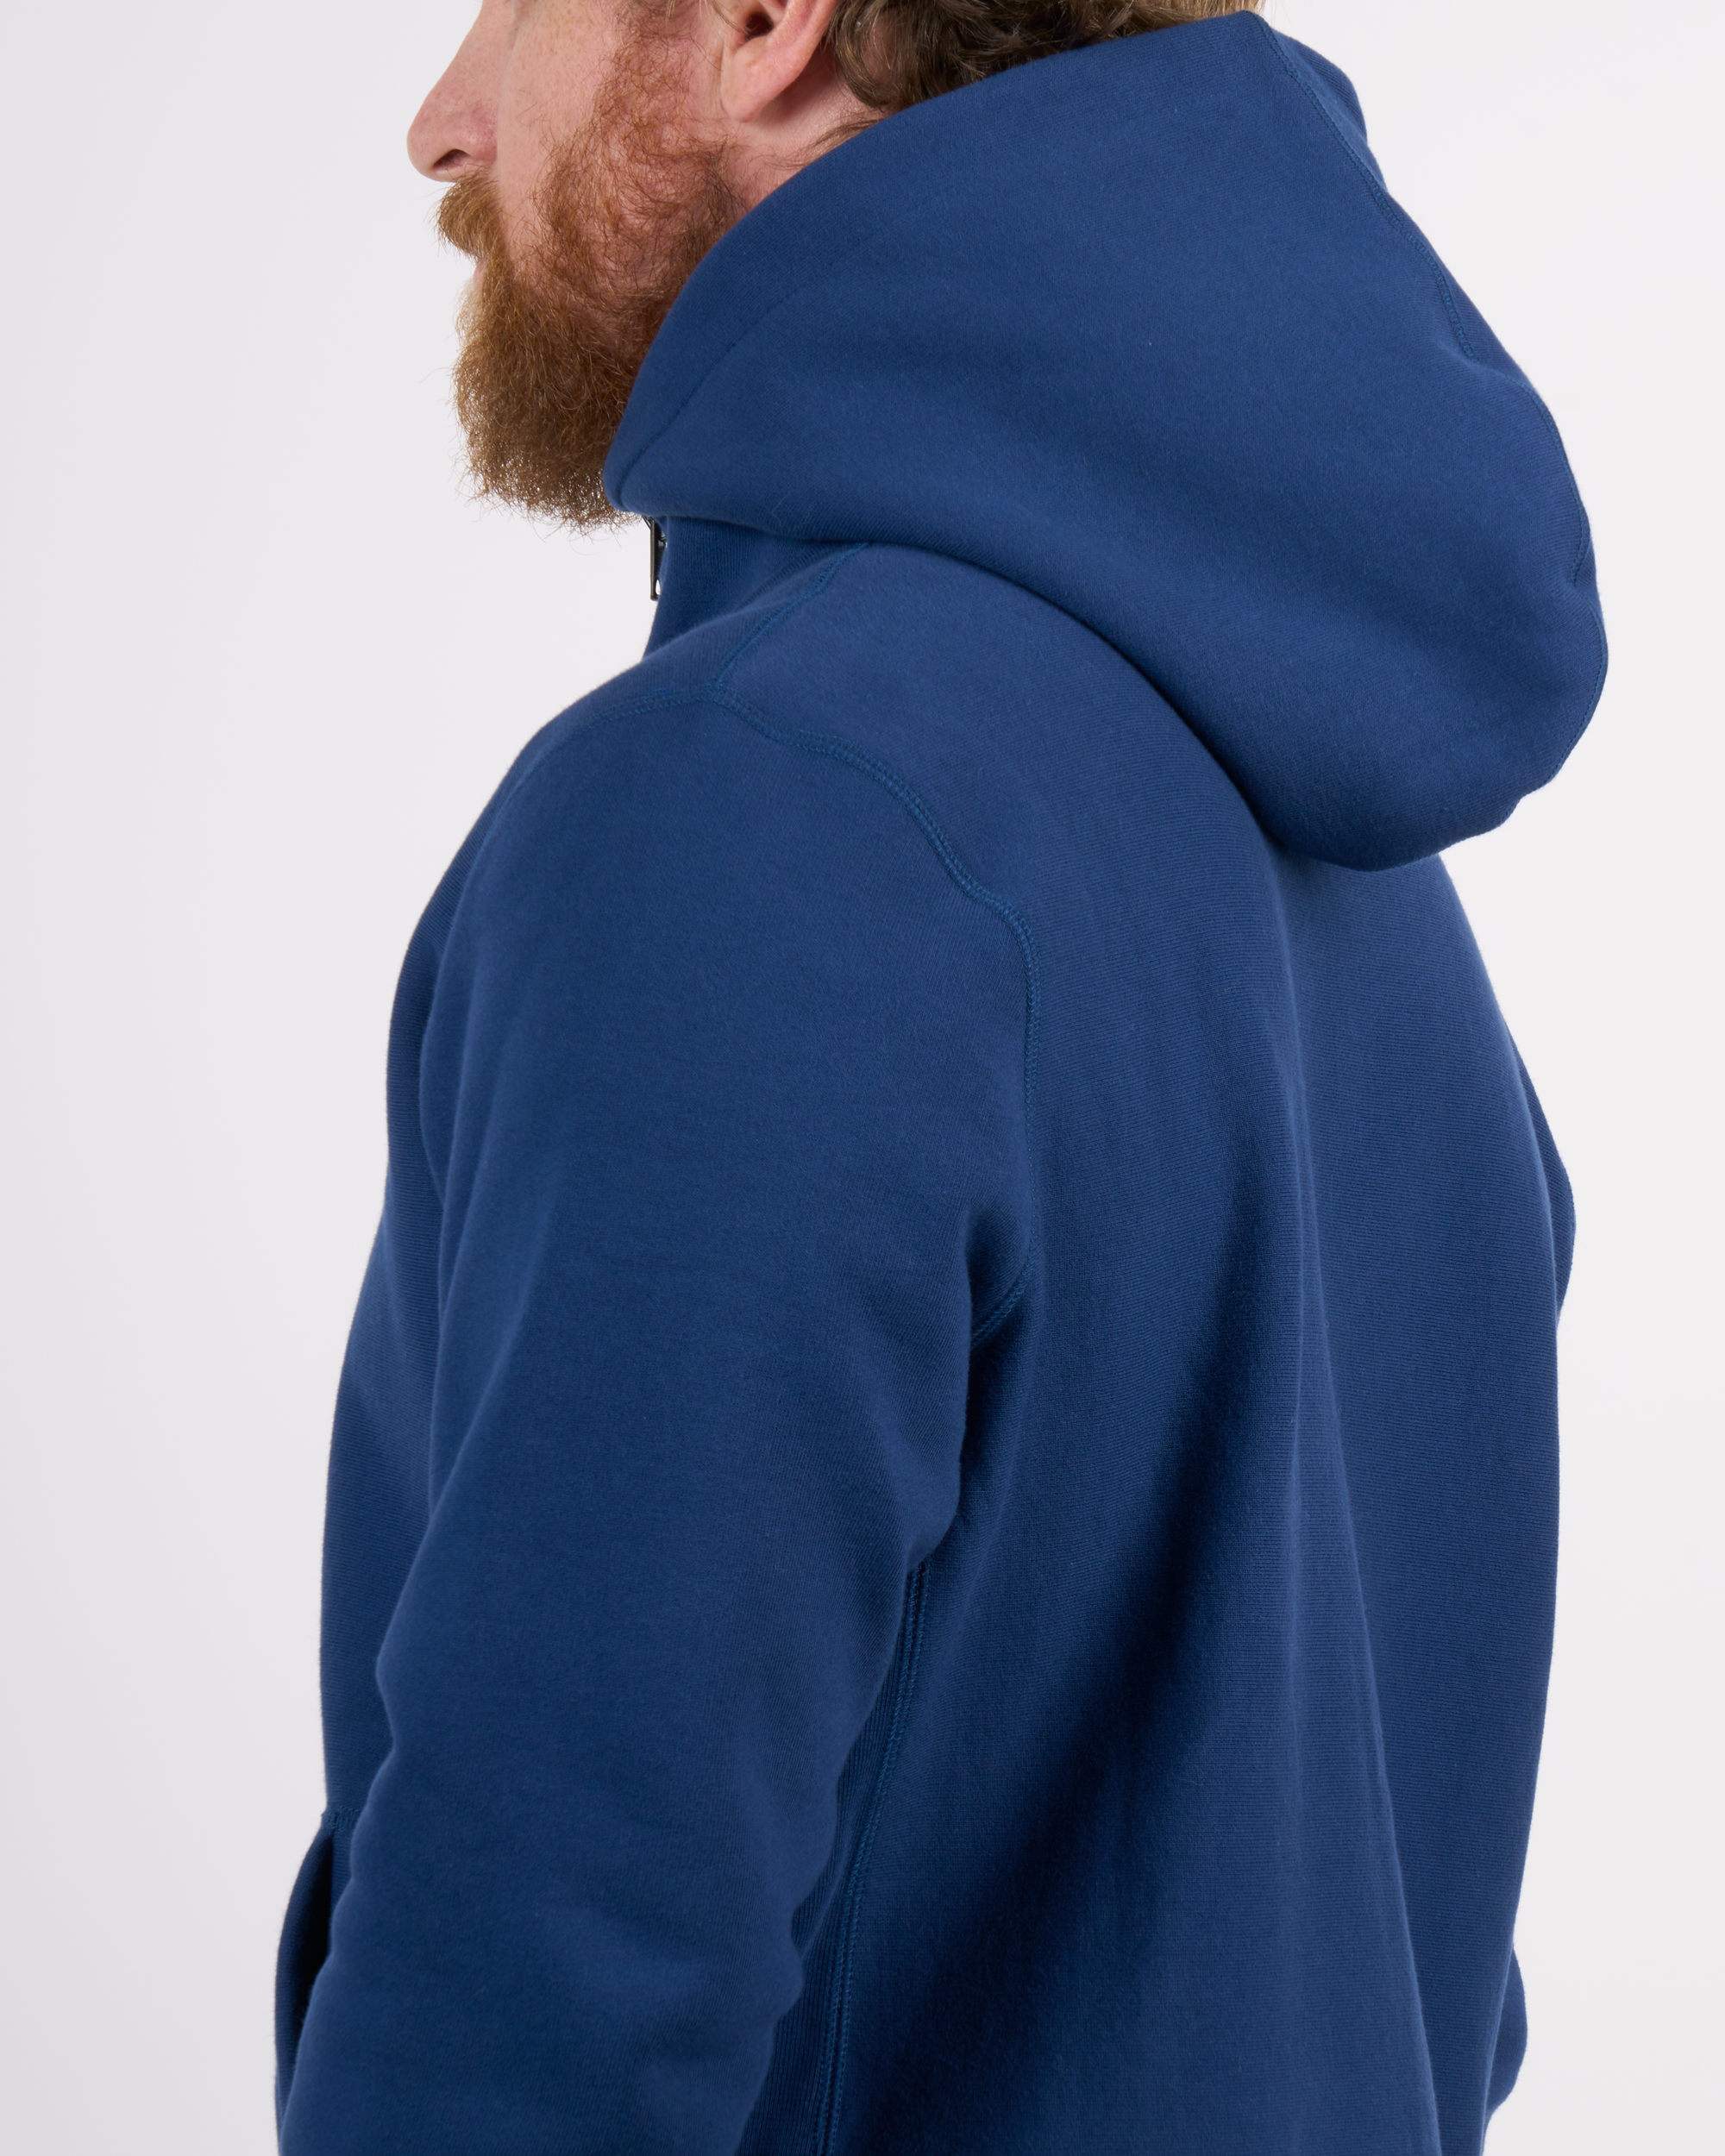 Foreign Rider Co Cotton Navy High Neck Hooded Sweater Hood Shoulder Detail